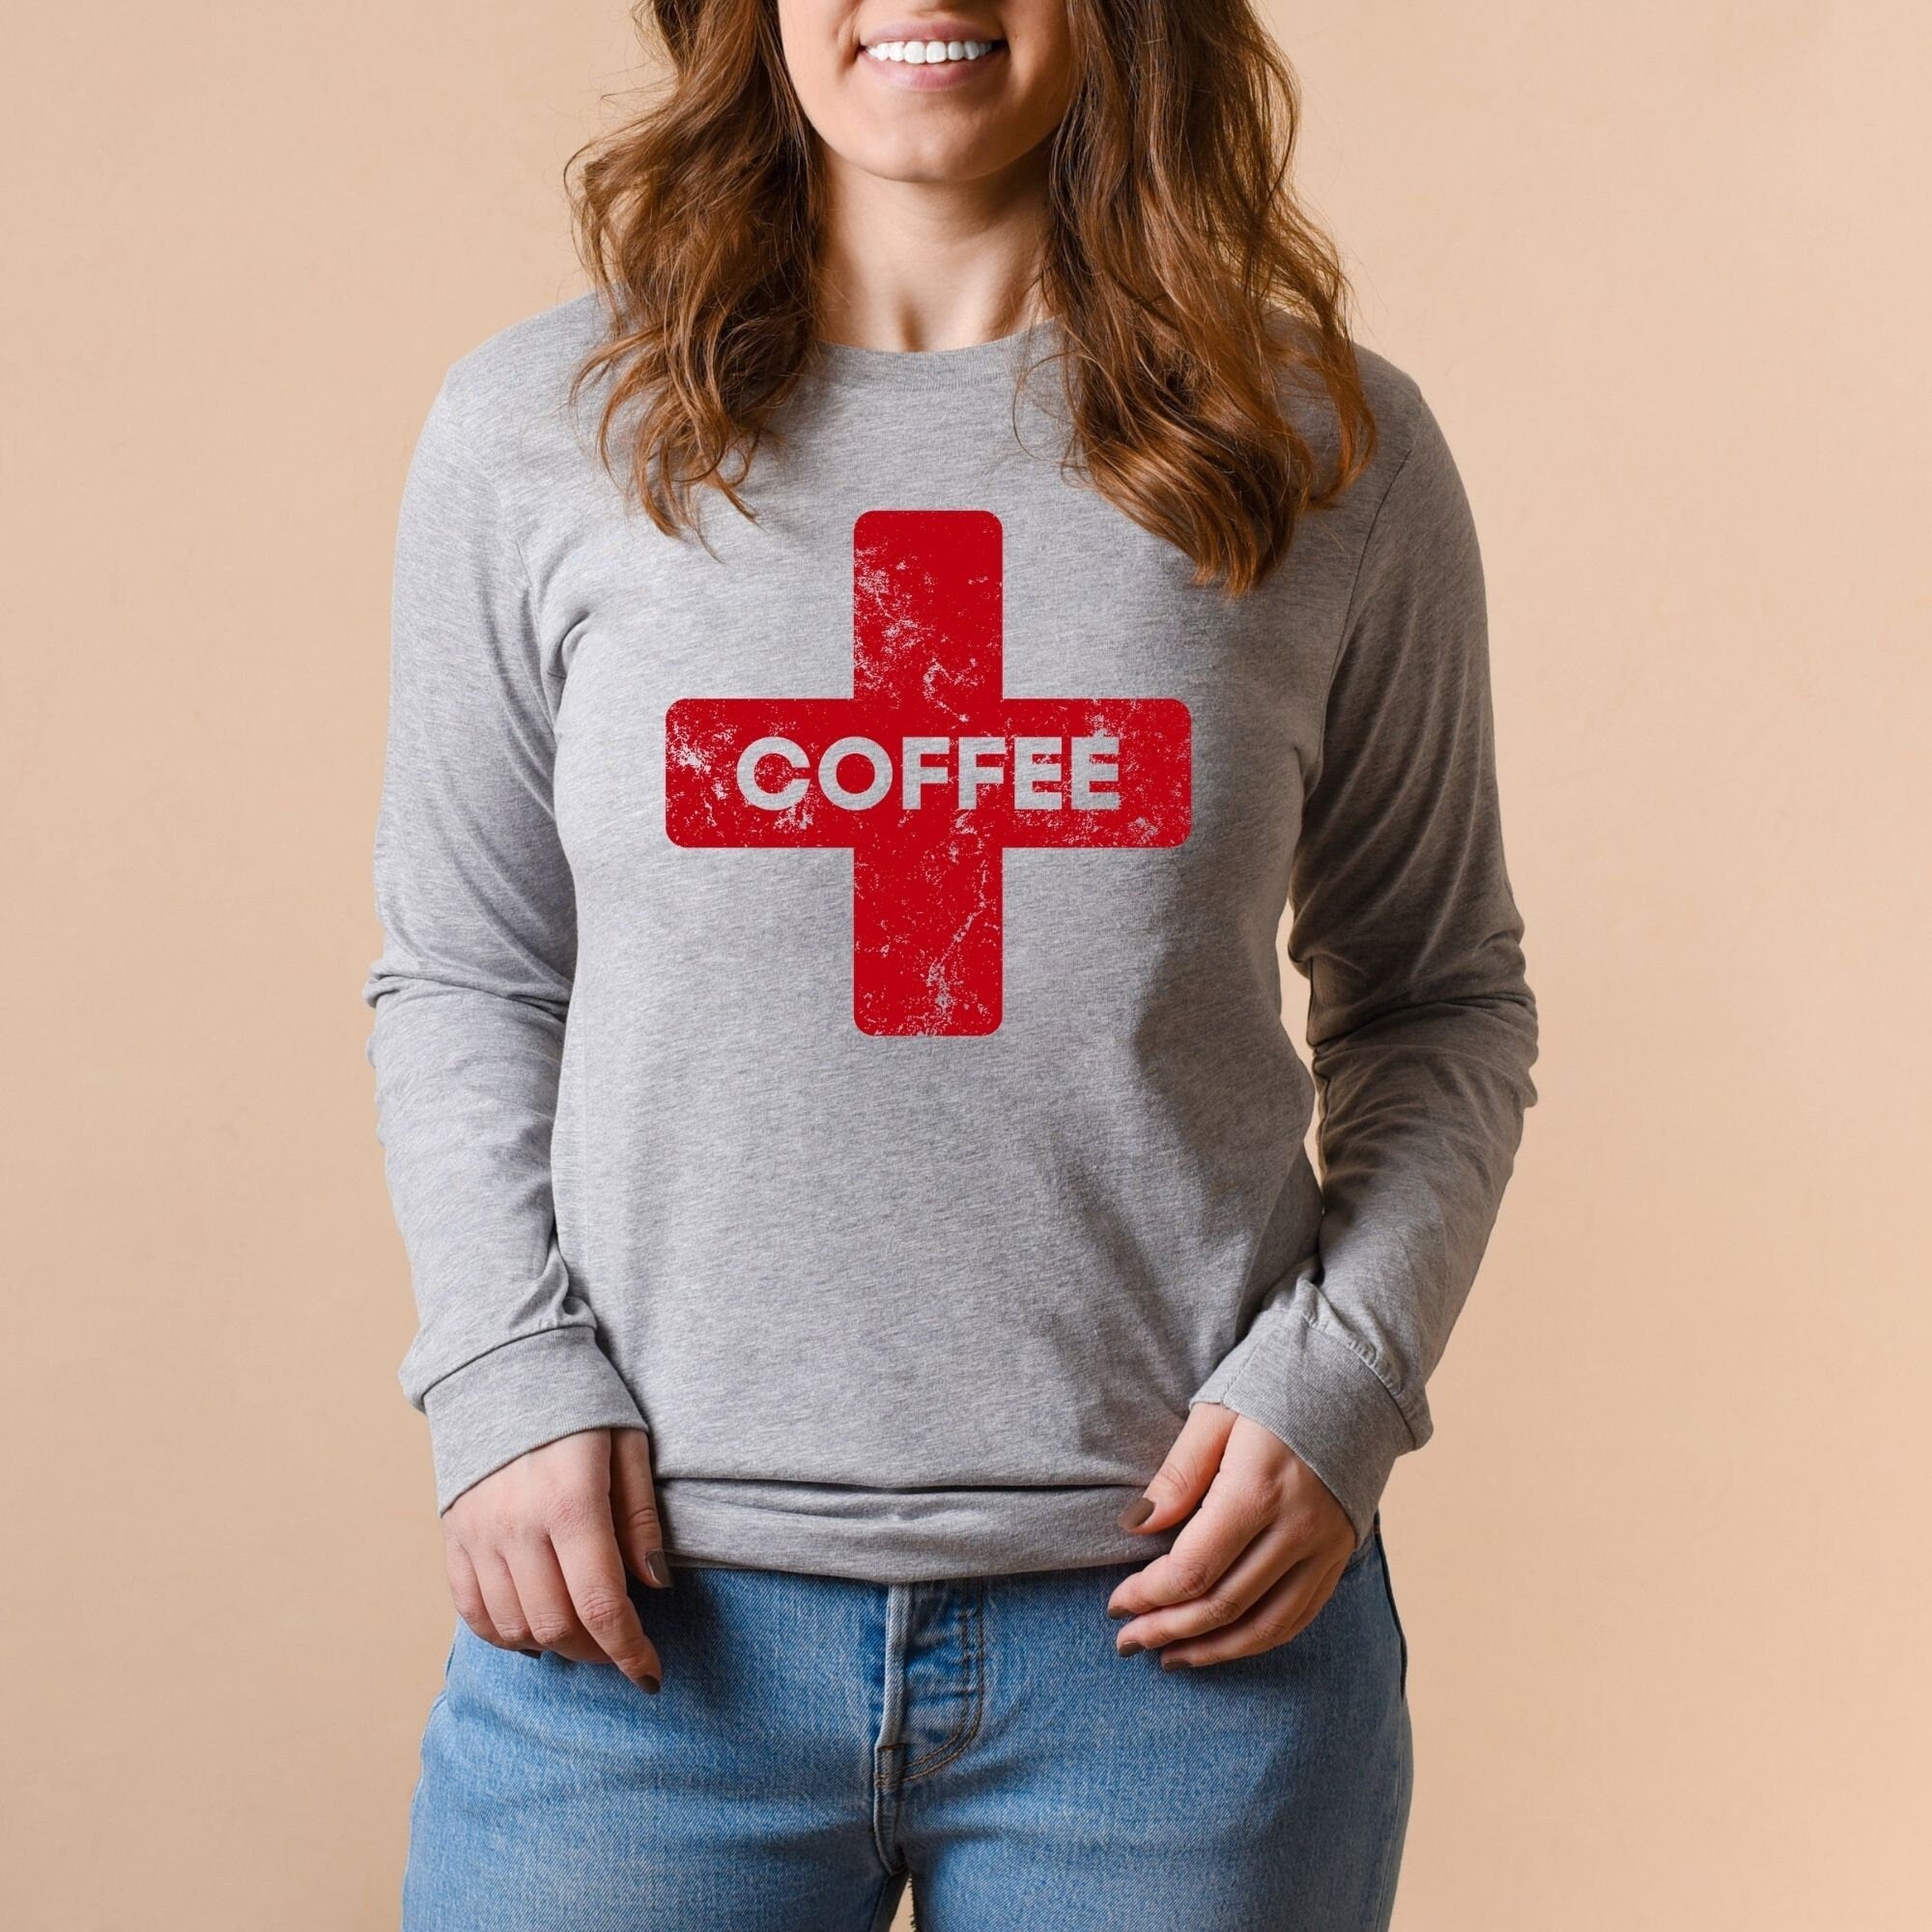 Dead Inside but Caffinated, Funny Womens Shirts, Womens Long Sleeve Shirts, Graphic Tees, Coffee Shirt, Caffeine Queen, Barista *UNISEX FIT*-Long Sleeves-208 Tees Wholesale, Idaho